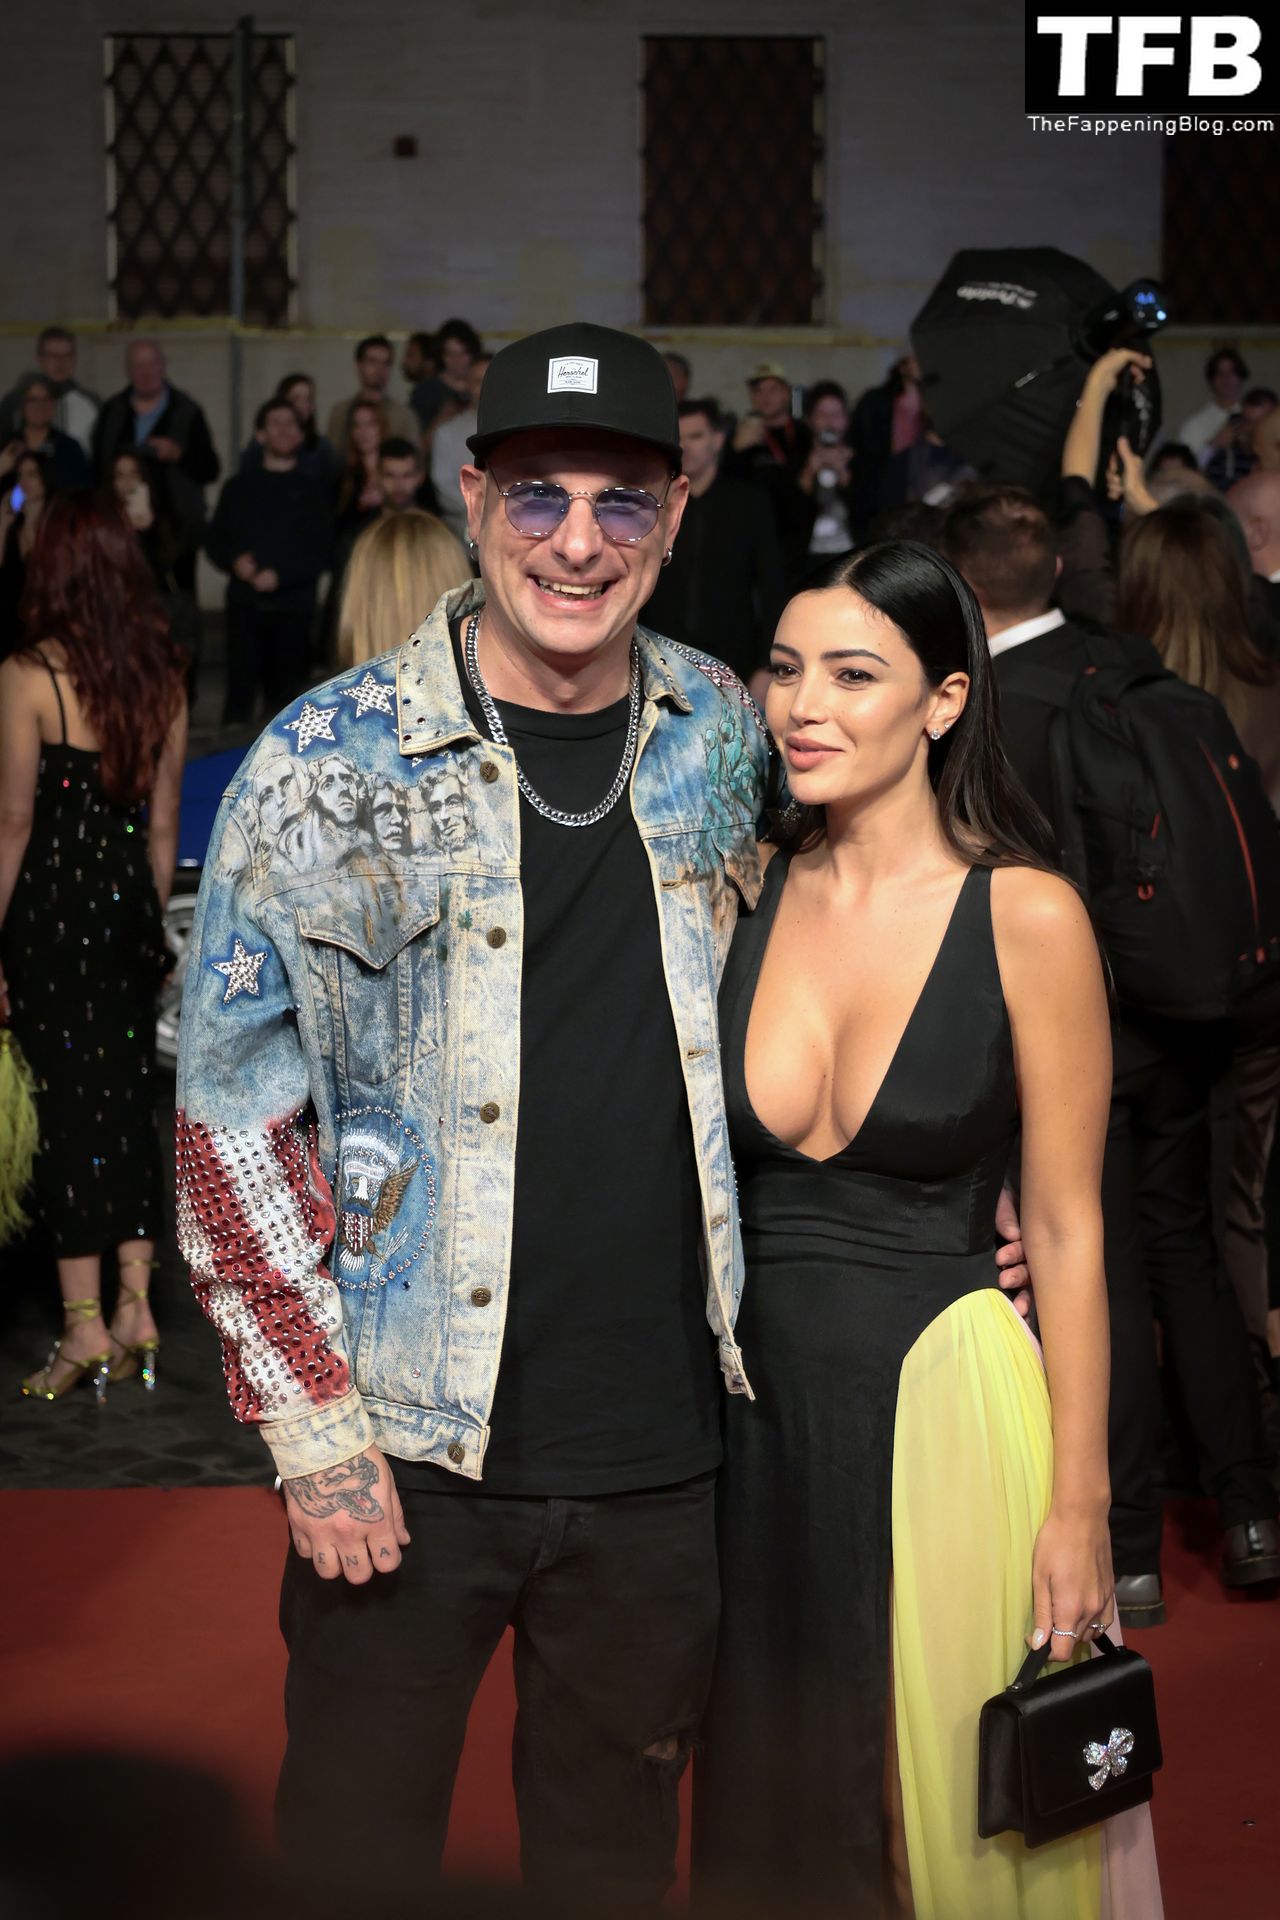 Martina Difonte Displays Her Sexy Tits on the Red Carpet For “Lamborghini – The Man Behind the Legend” (24 Photos)